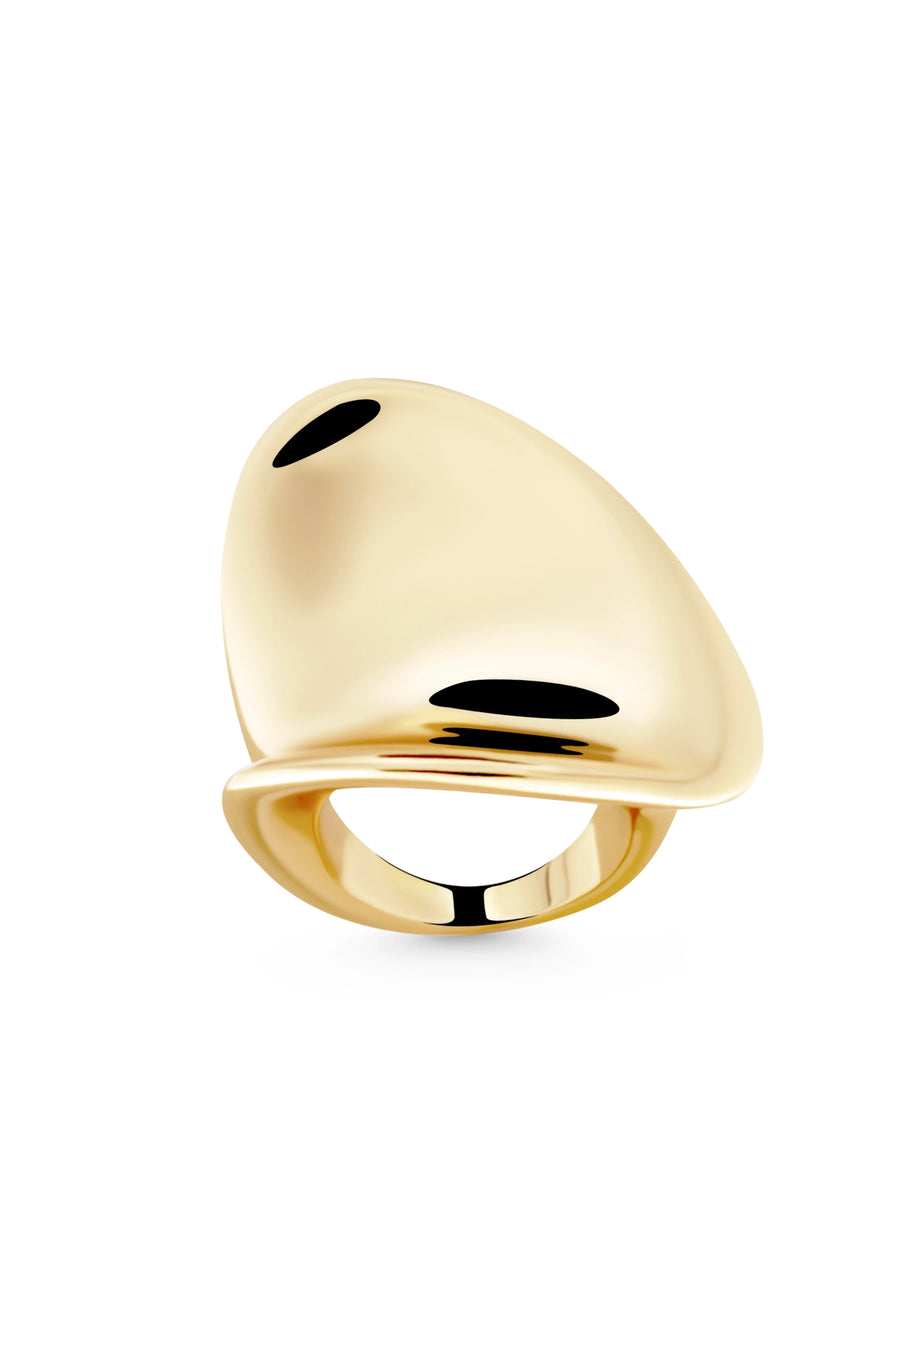 NEFERTITI Ring. Ring topped broad curved plate in high gloss finish, size US7, 18K gold vermeil, handmade, hypoallergenic, water-resistant